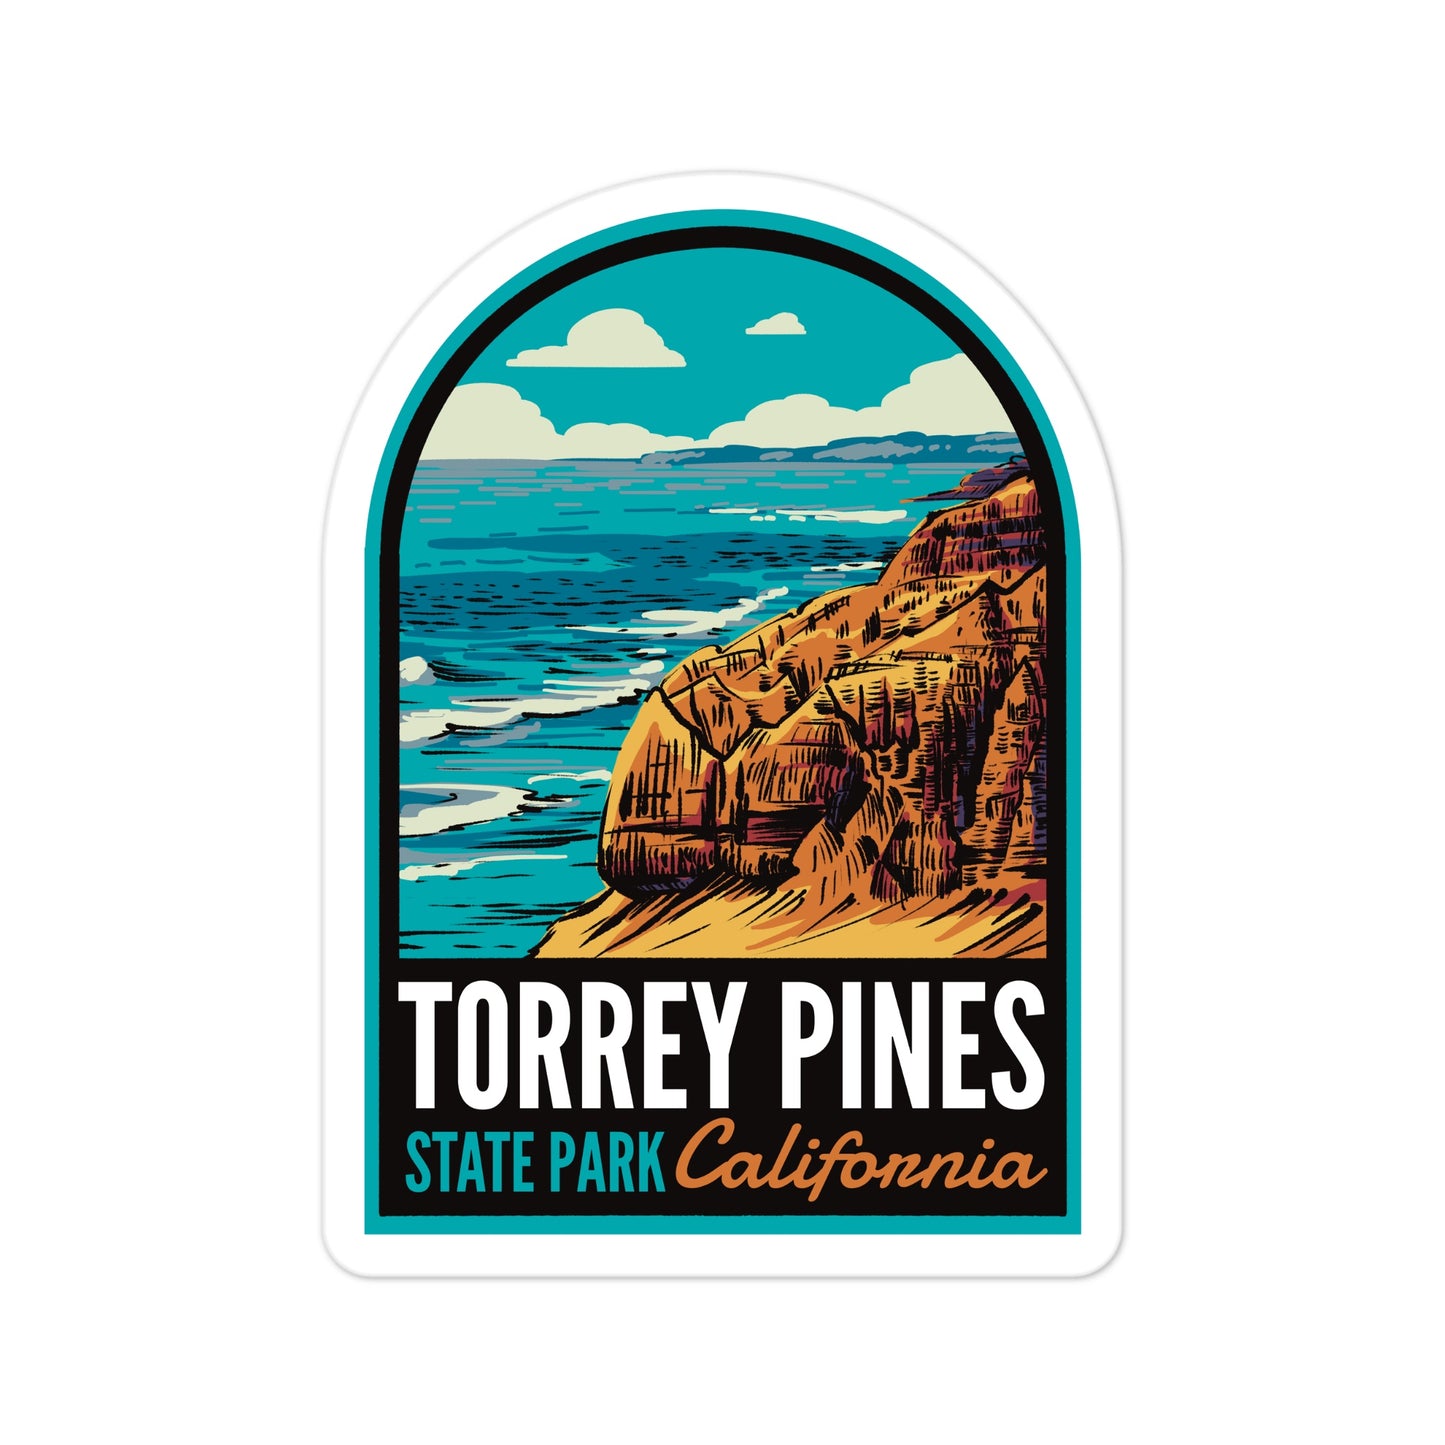 A sticker of Torrey Pines State Park